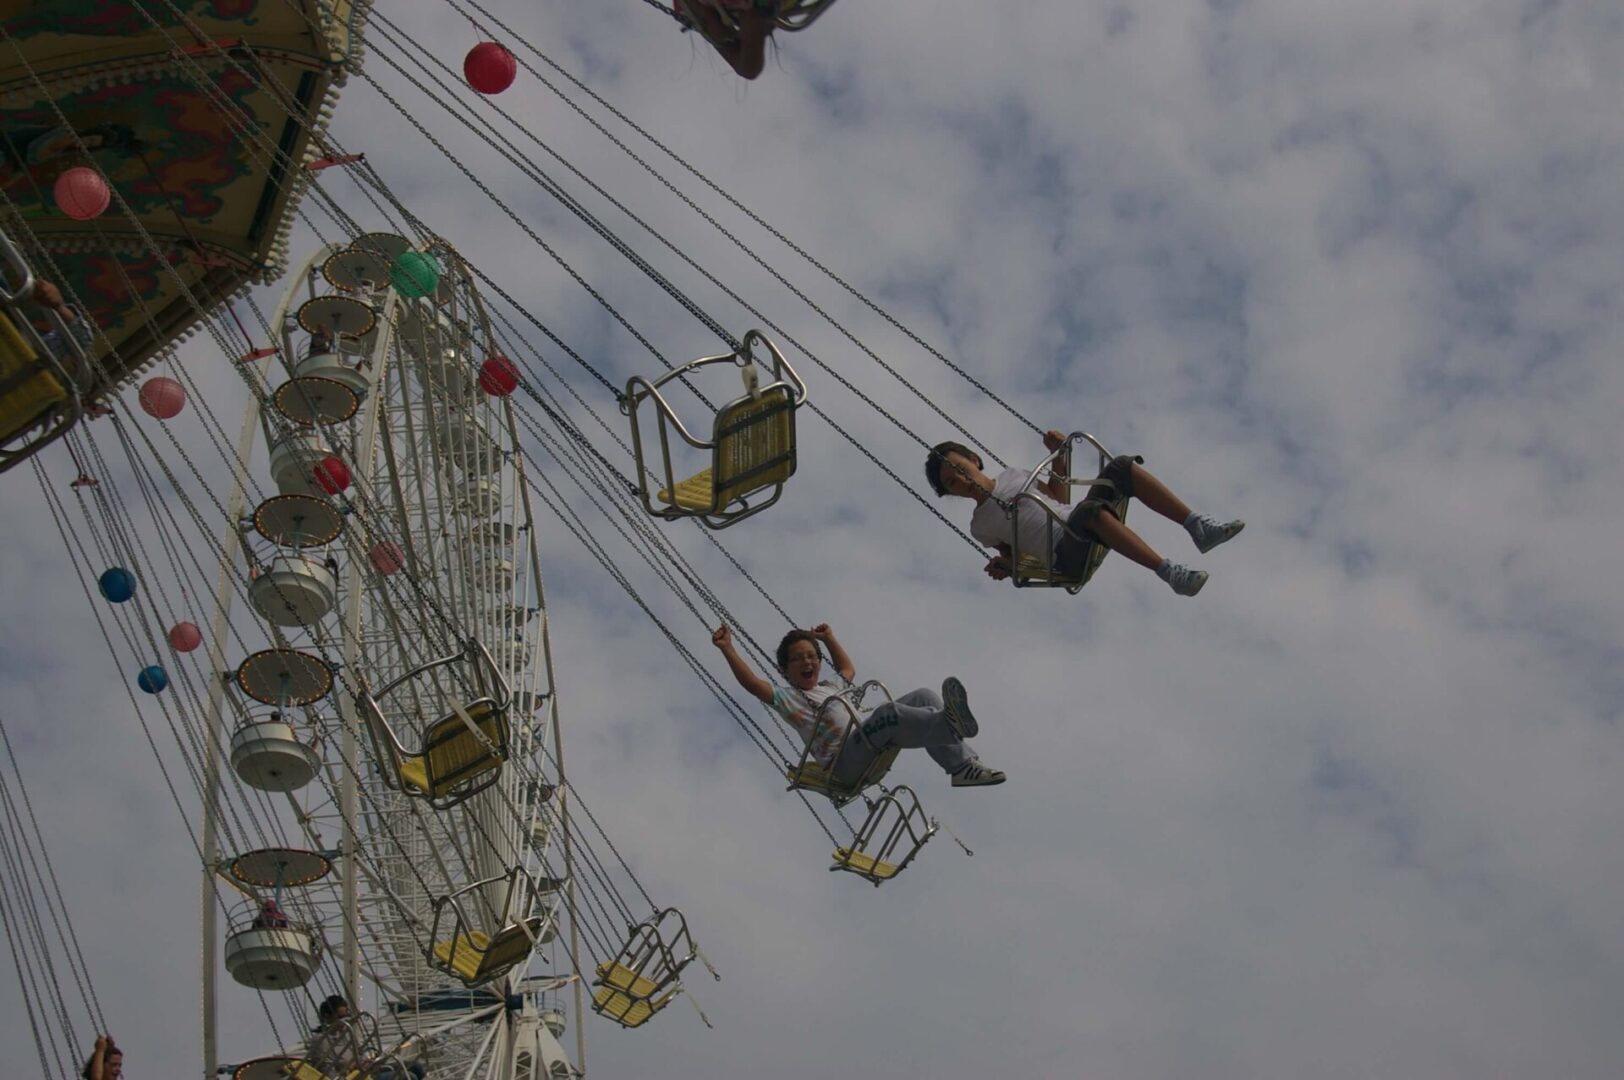 A group of people riding on the side of a ferris wheel.